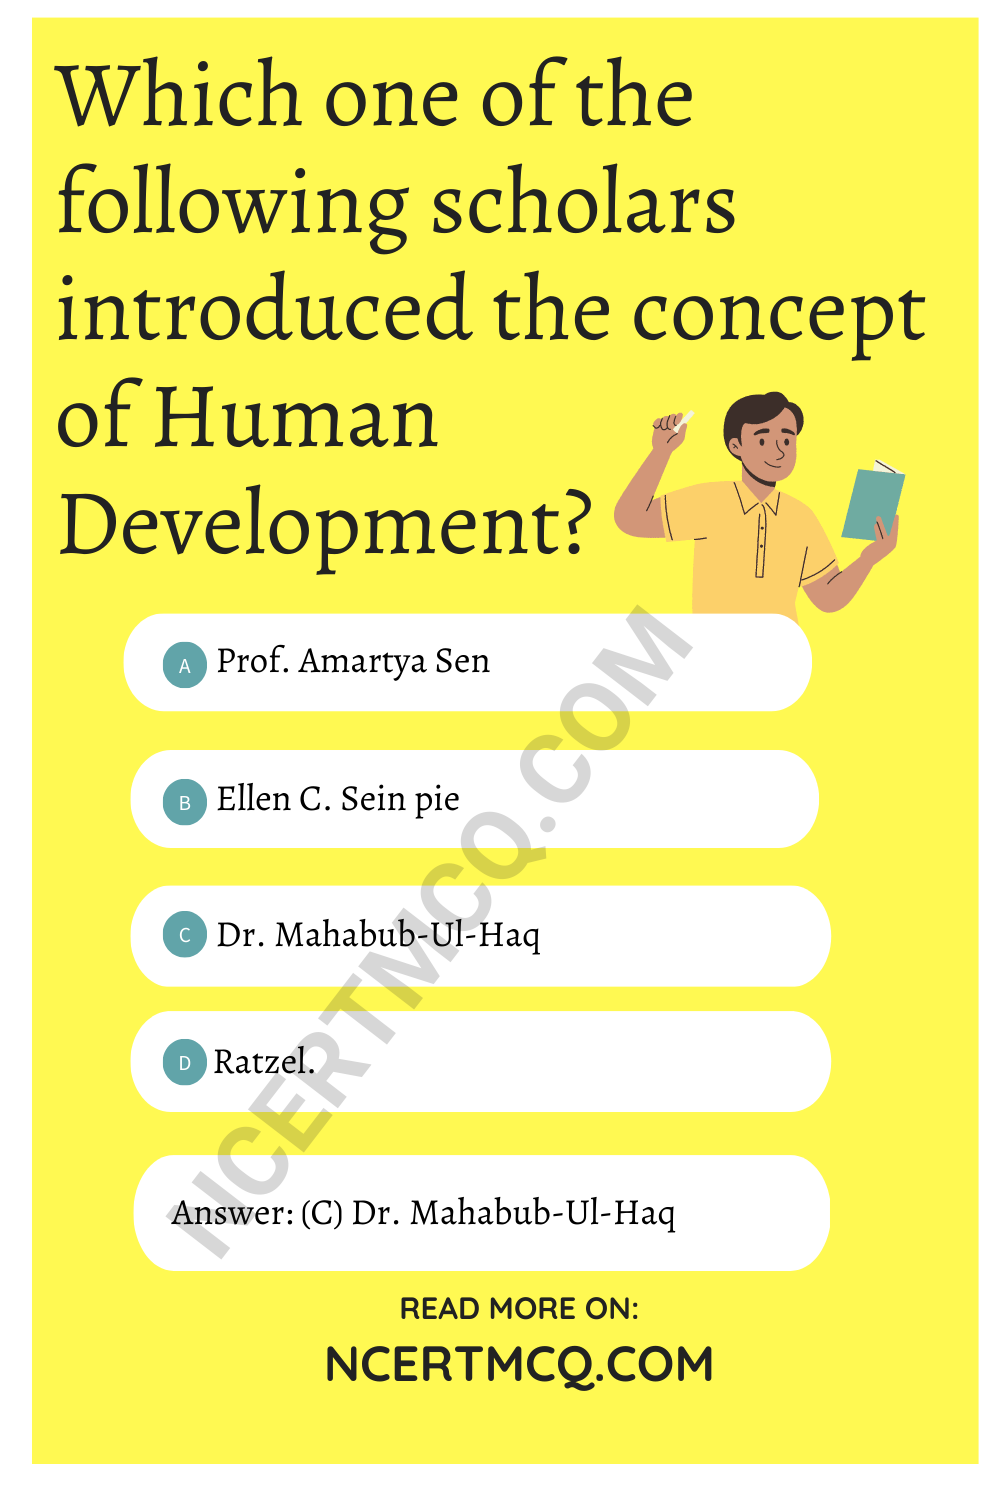 Which one of the following scholars introduced the concept of Human Development?